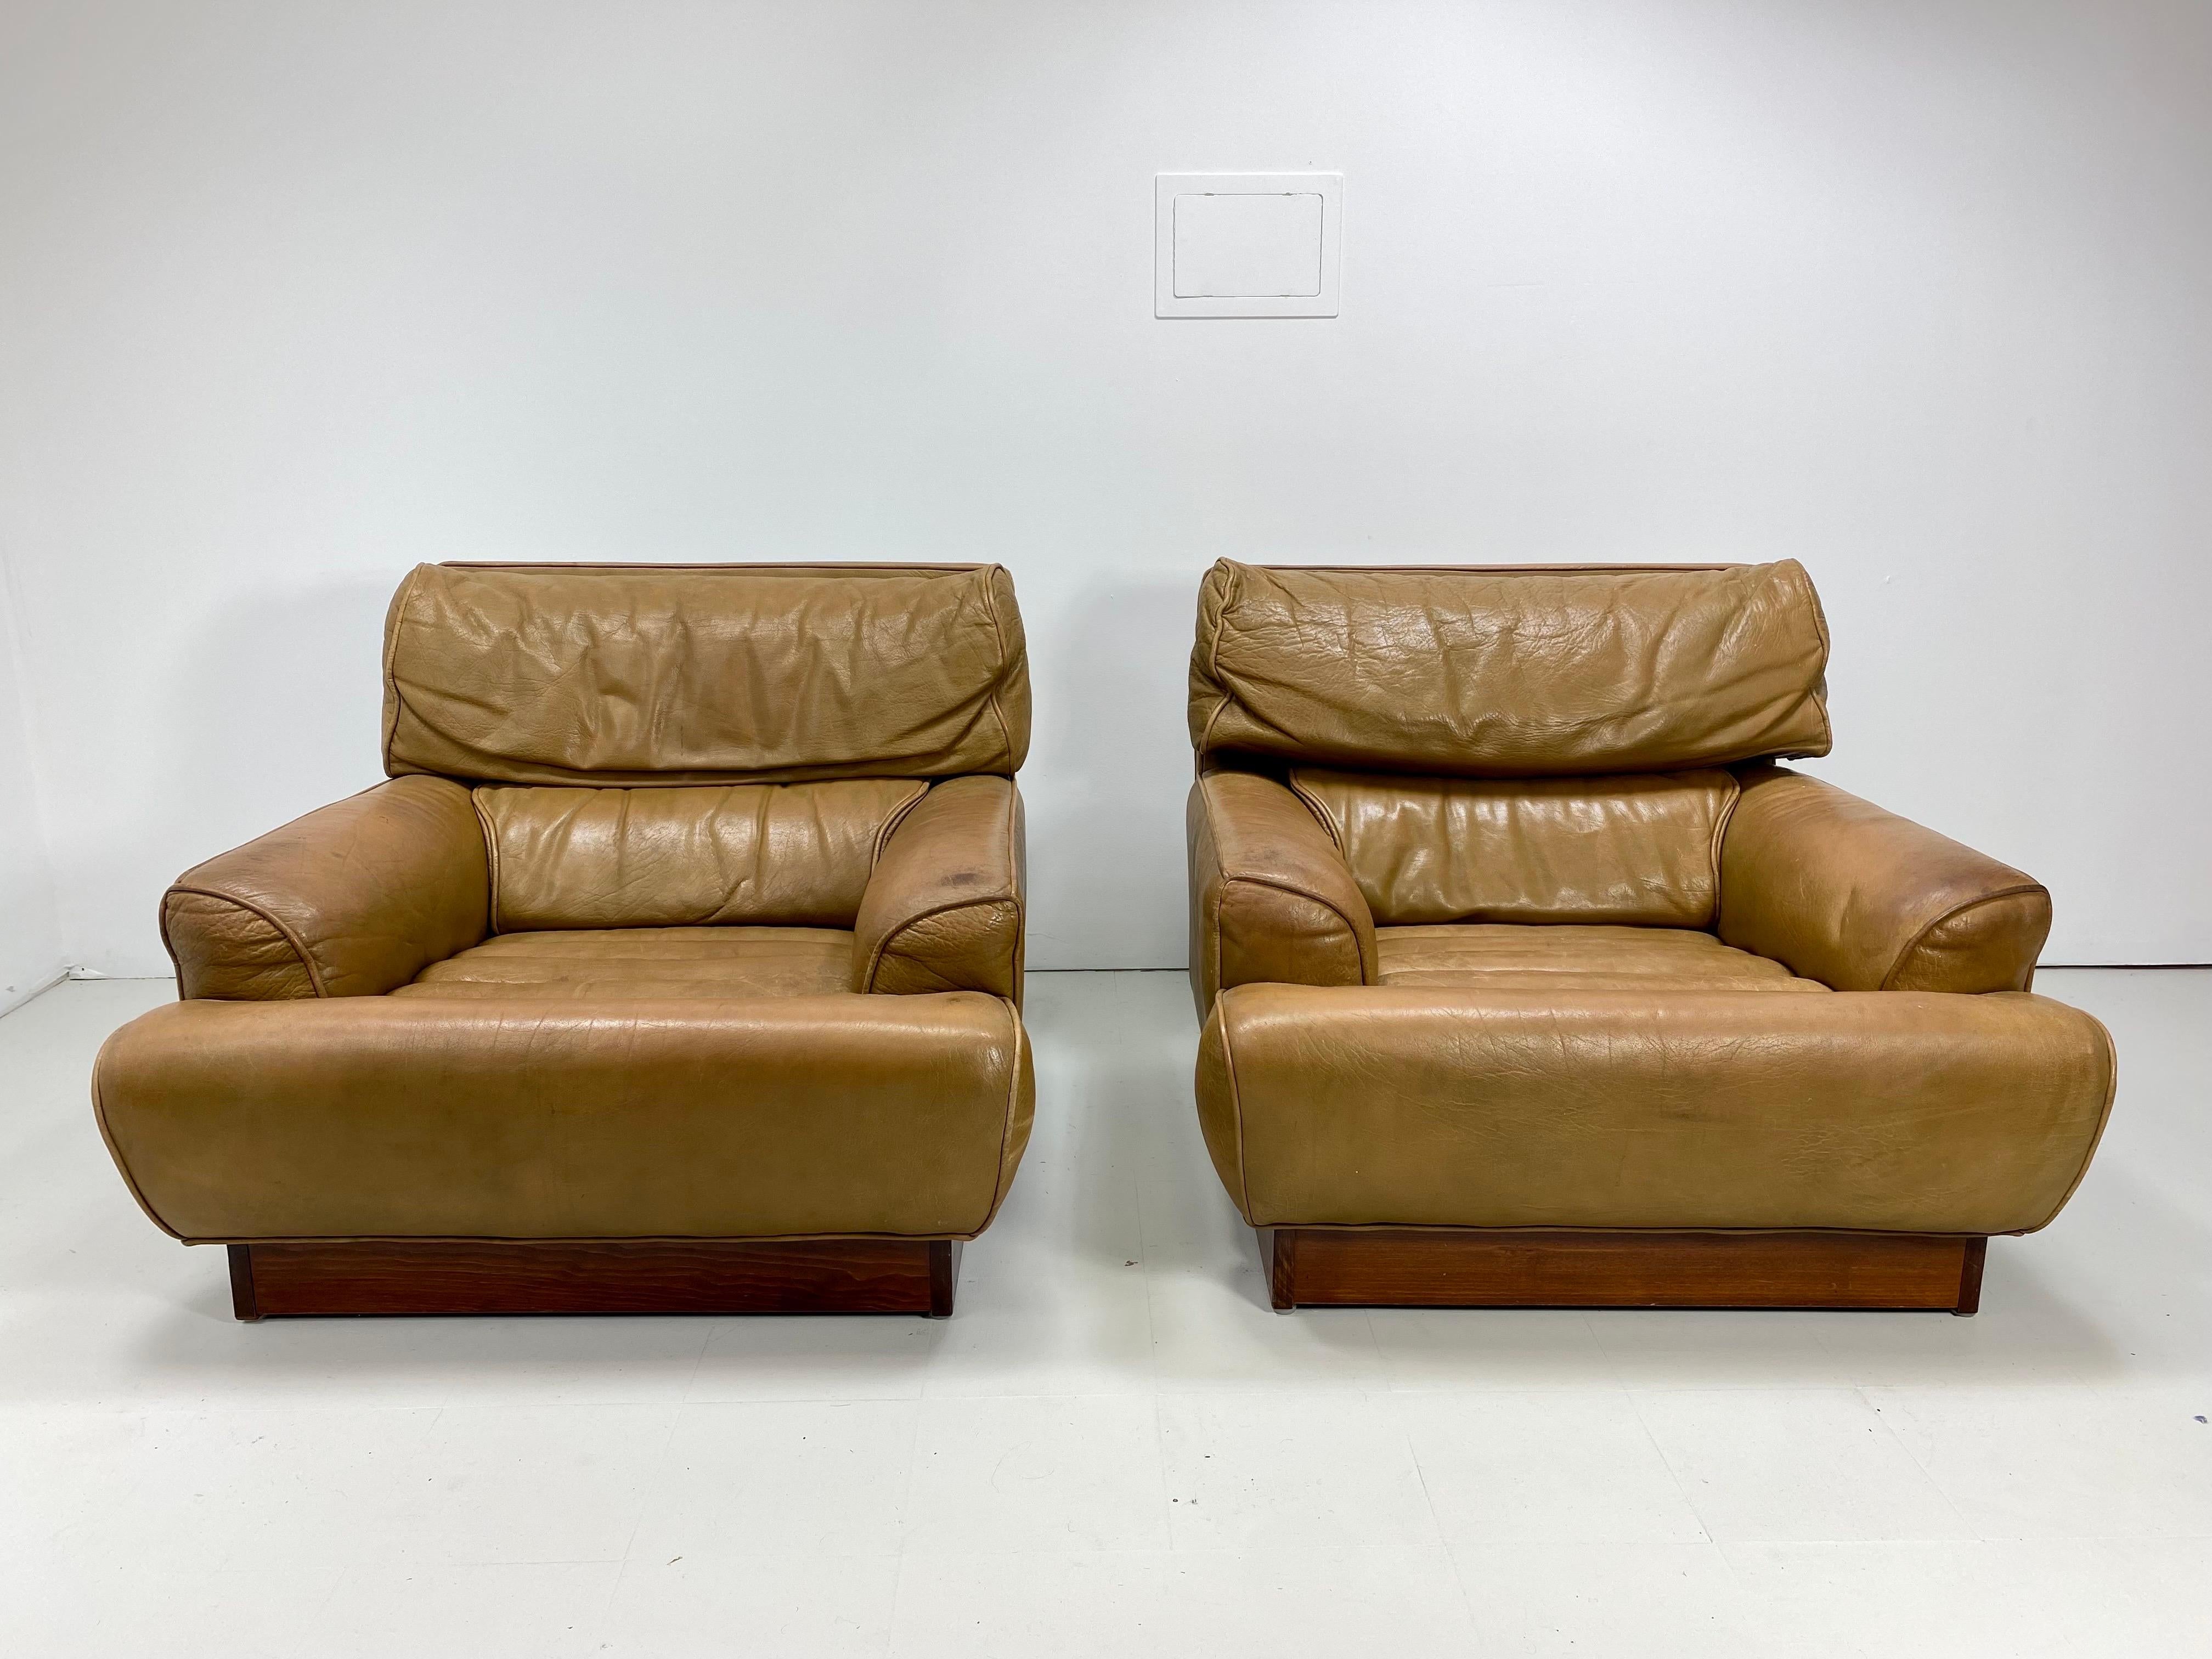 Pair of Arne Norell “Mexico” Lounge Chairs for Arne Norell Mobel AB. Sweden, 1970’s. Original high quality tan leather has a nice worn patina. Wood plinth base,


